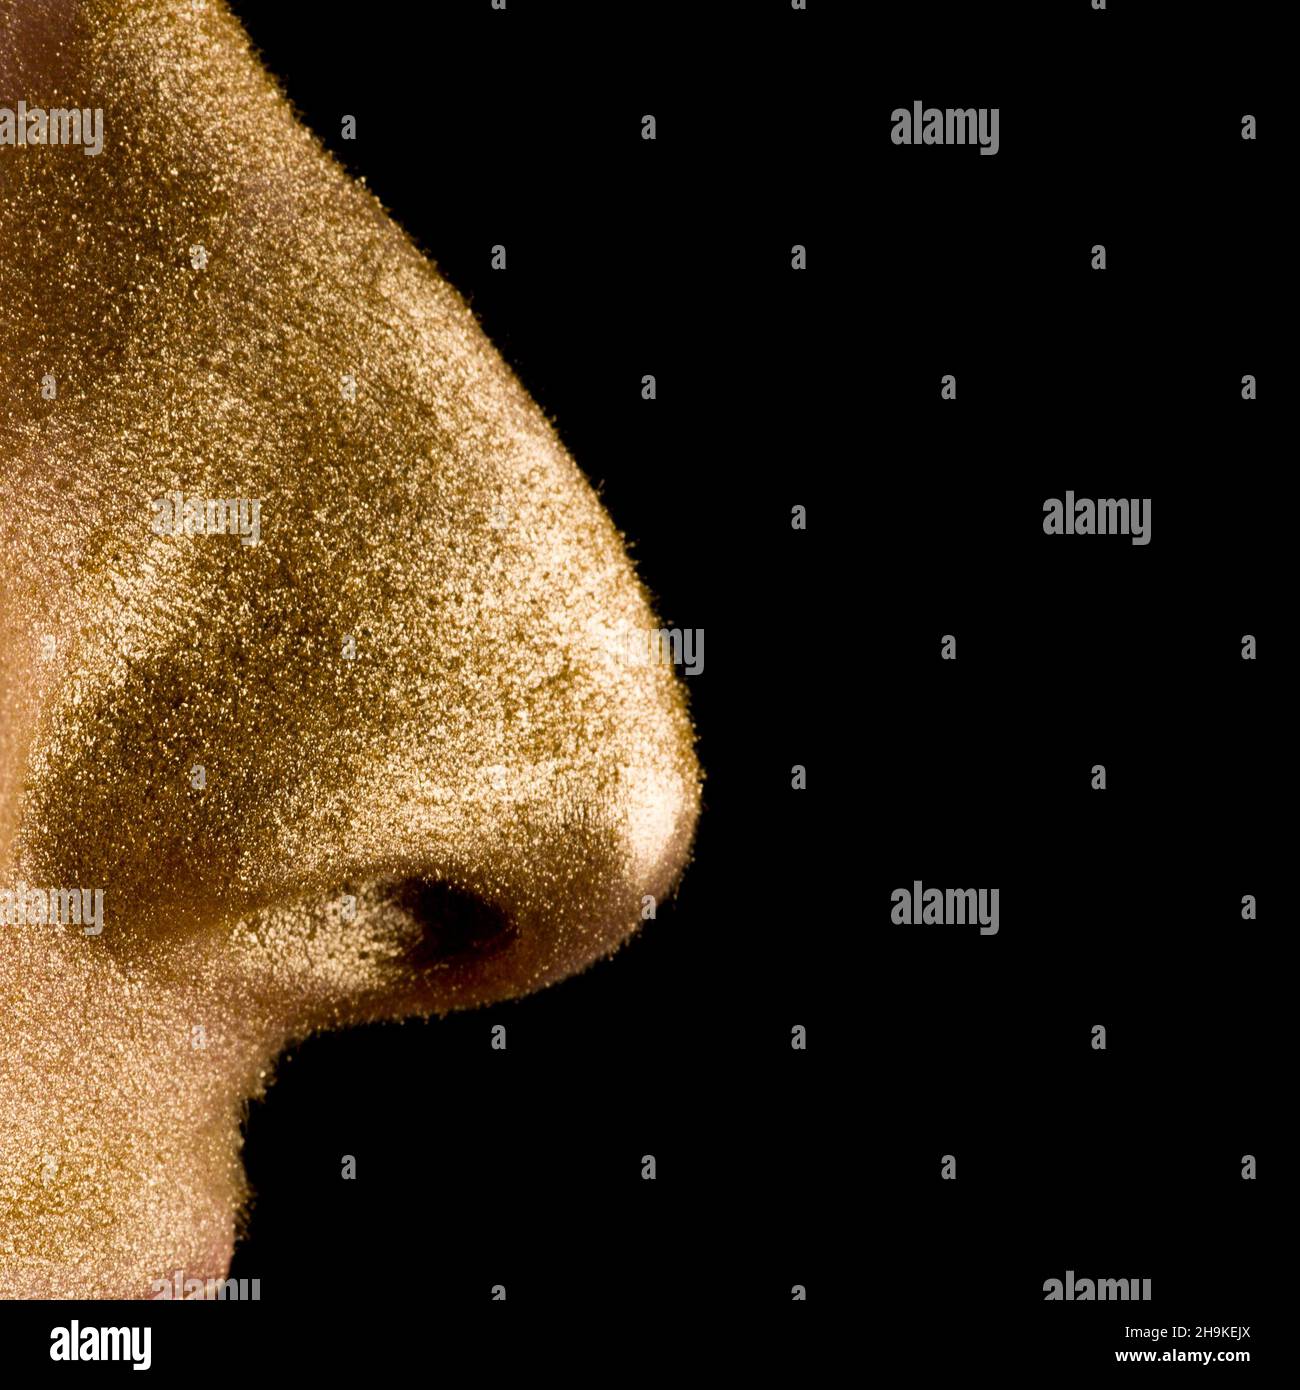 Nose, earn gold, golden, one, face, side, profile, proverb, synonym, yellow, have, charming, precious, magic, values exempted, sparkles, very, value Stock Photo